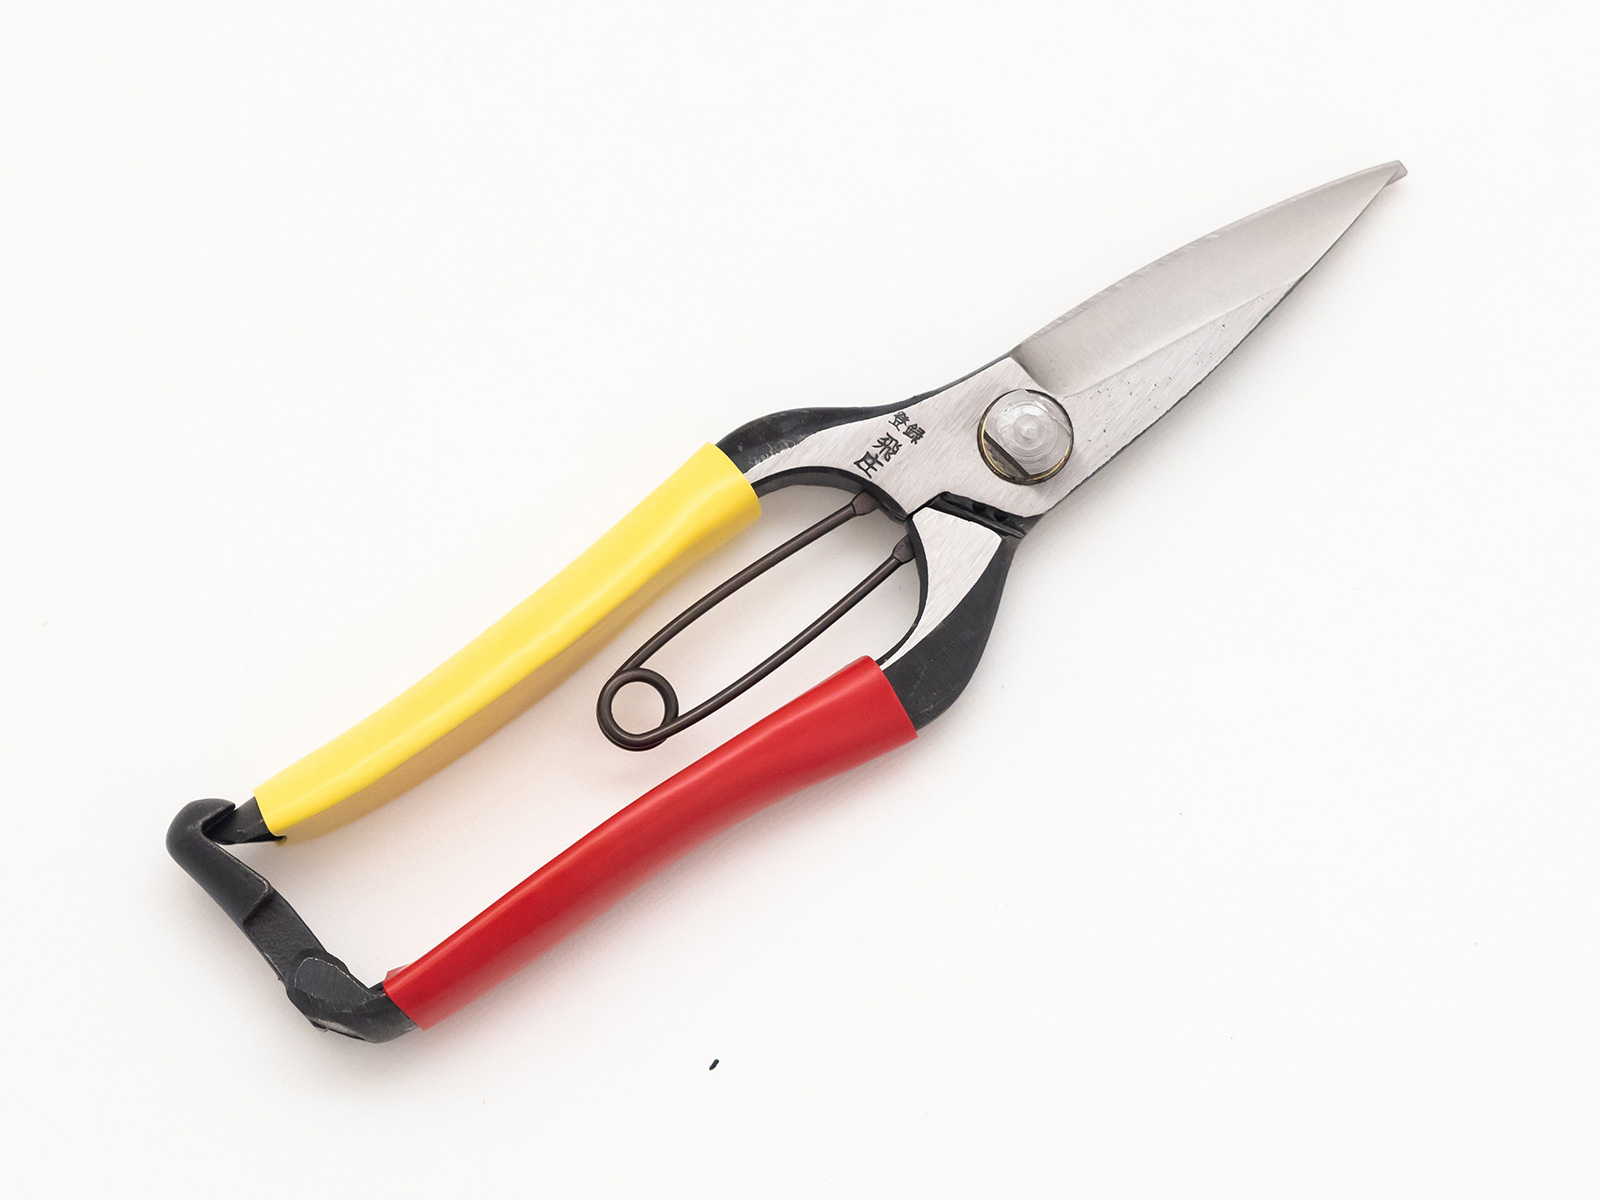 [Tobisho] Cutting buds pruner (180mm edges, left handed, Red and Yellow taped)